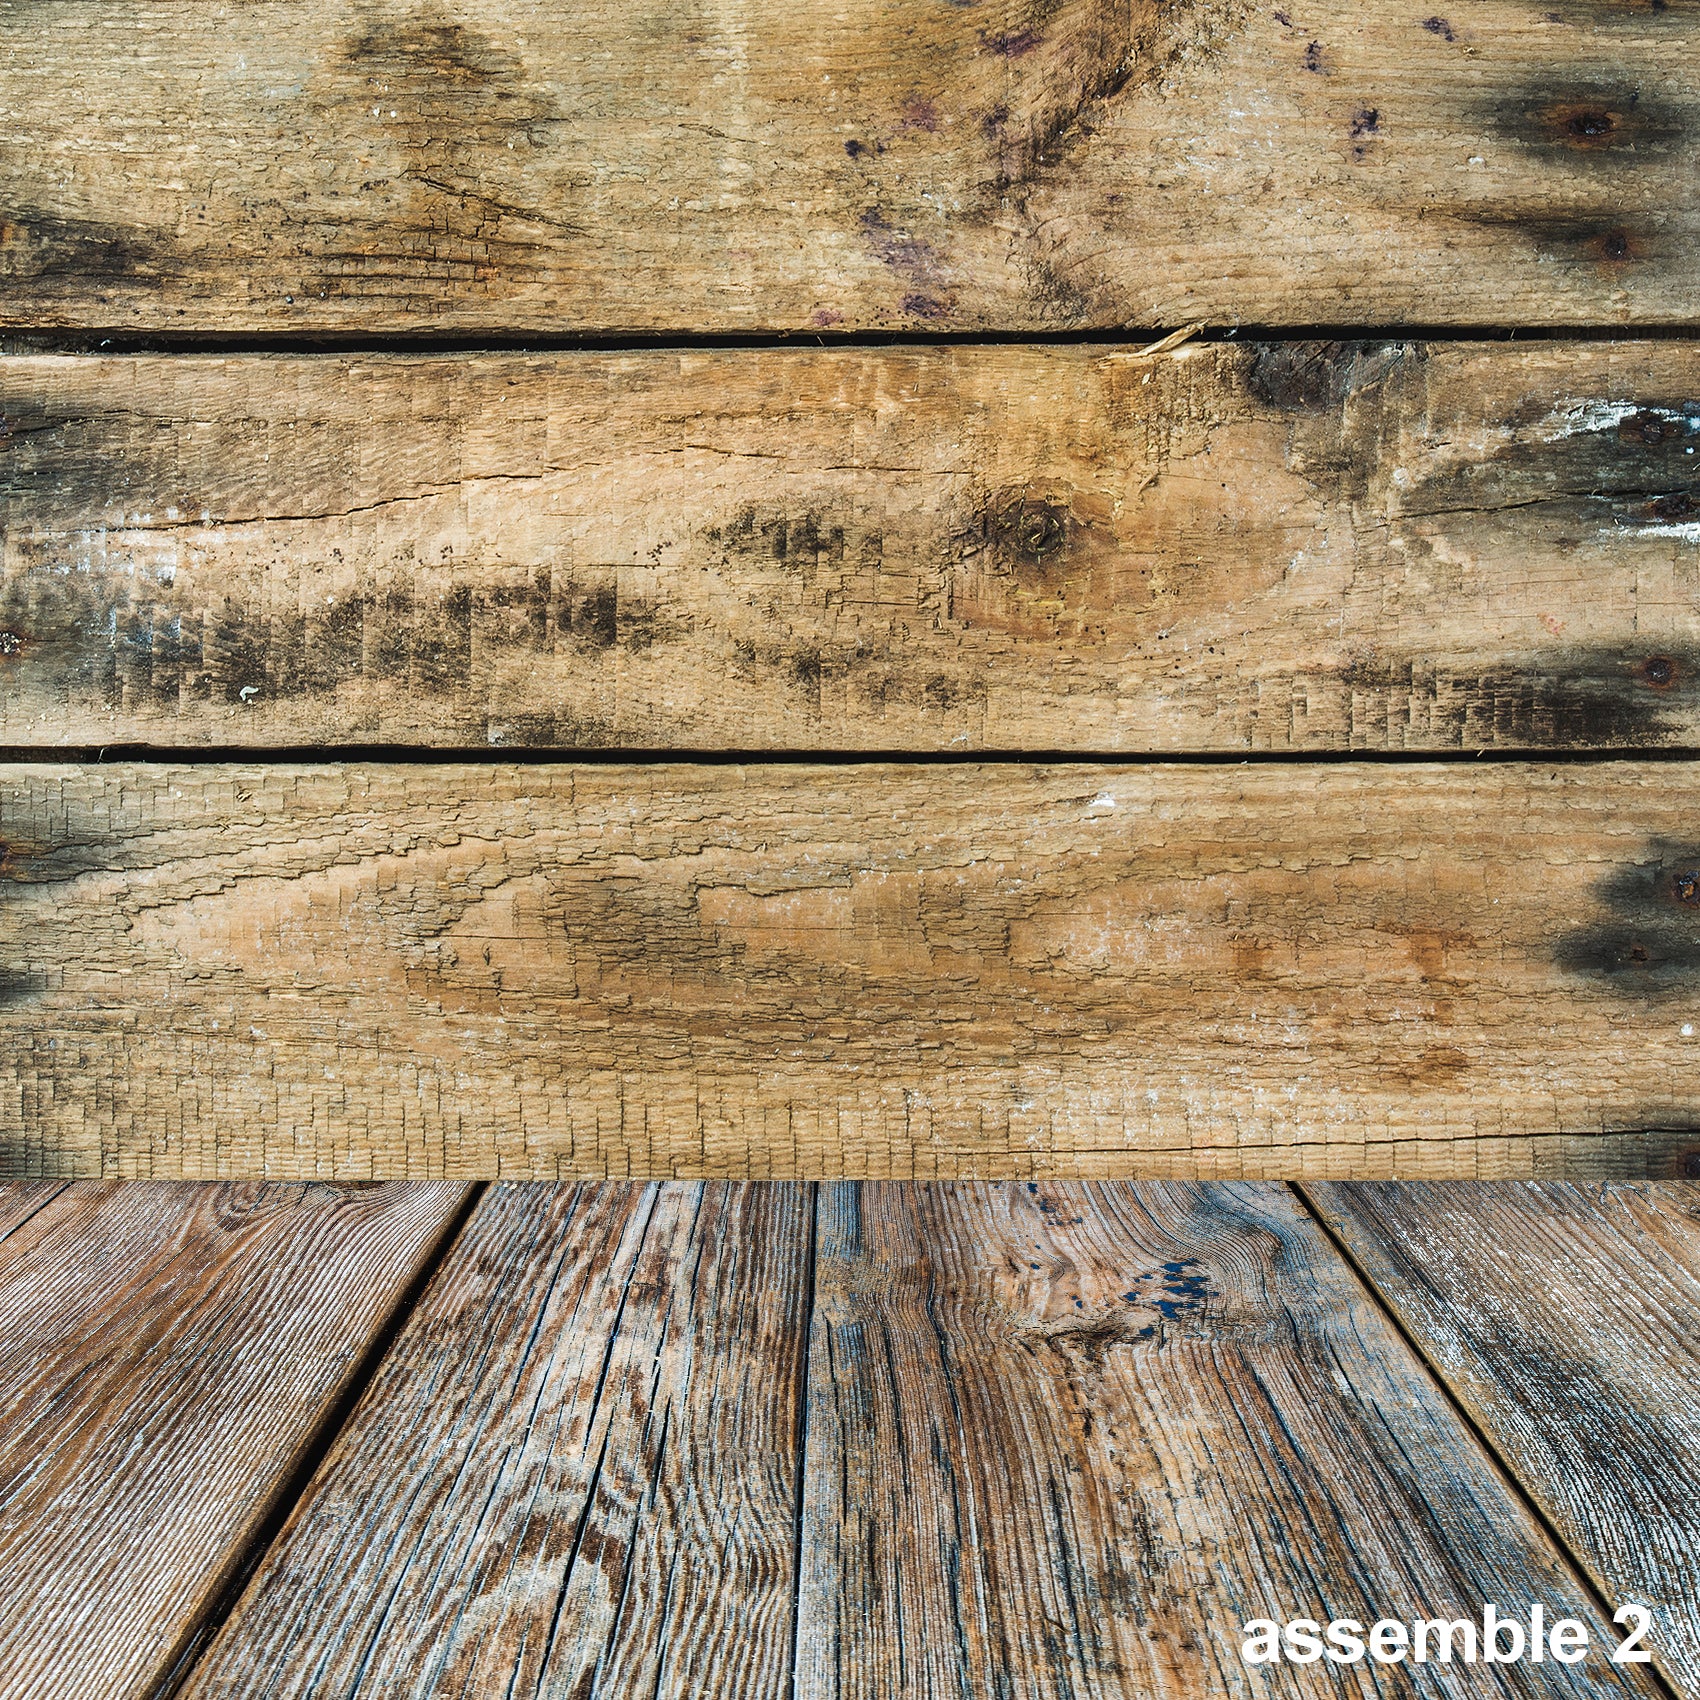 Rustic Distressed Wood Backdrop Photography Background #1776 1777 2-pack